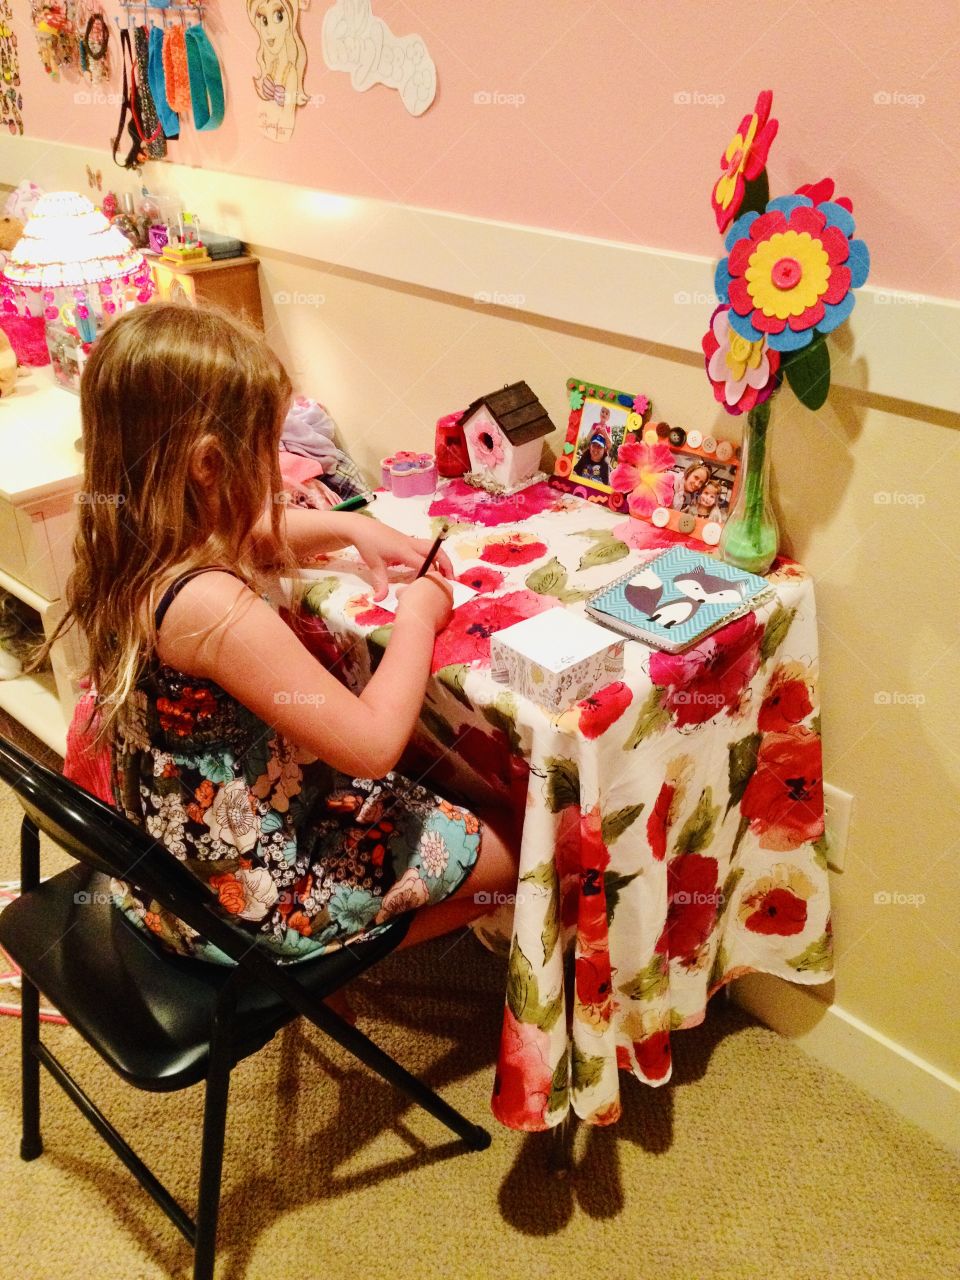 Darling little girl in her flowery room at her desk working on a note to someone special!! 